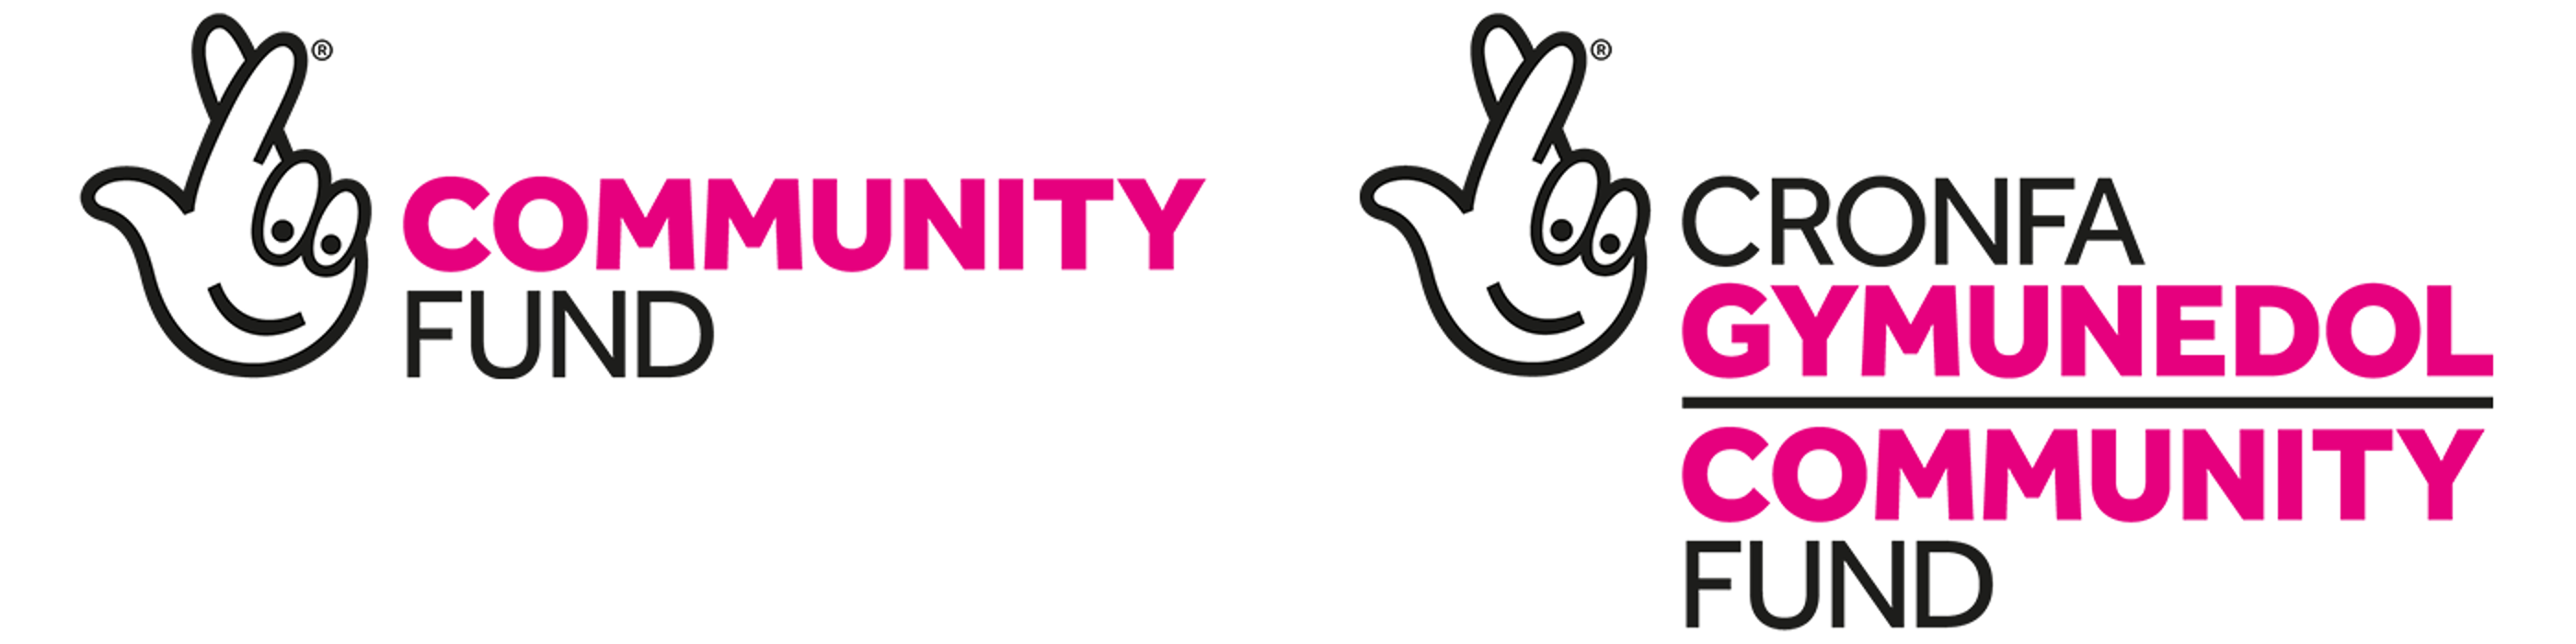 community fund logo in English and Welsh